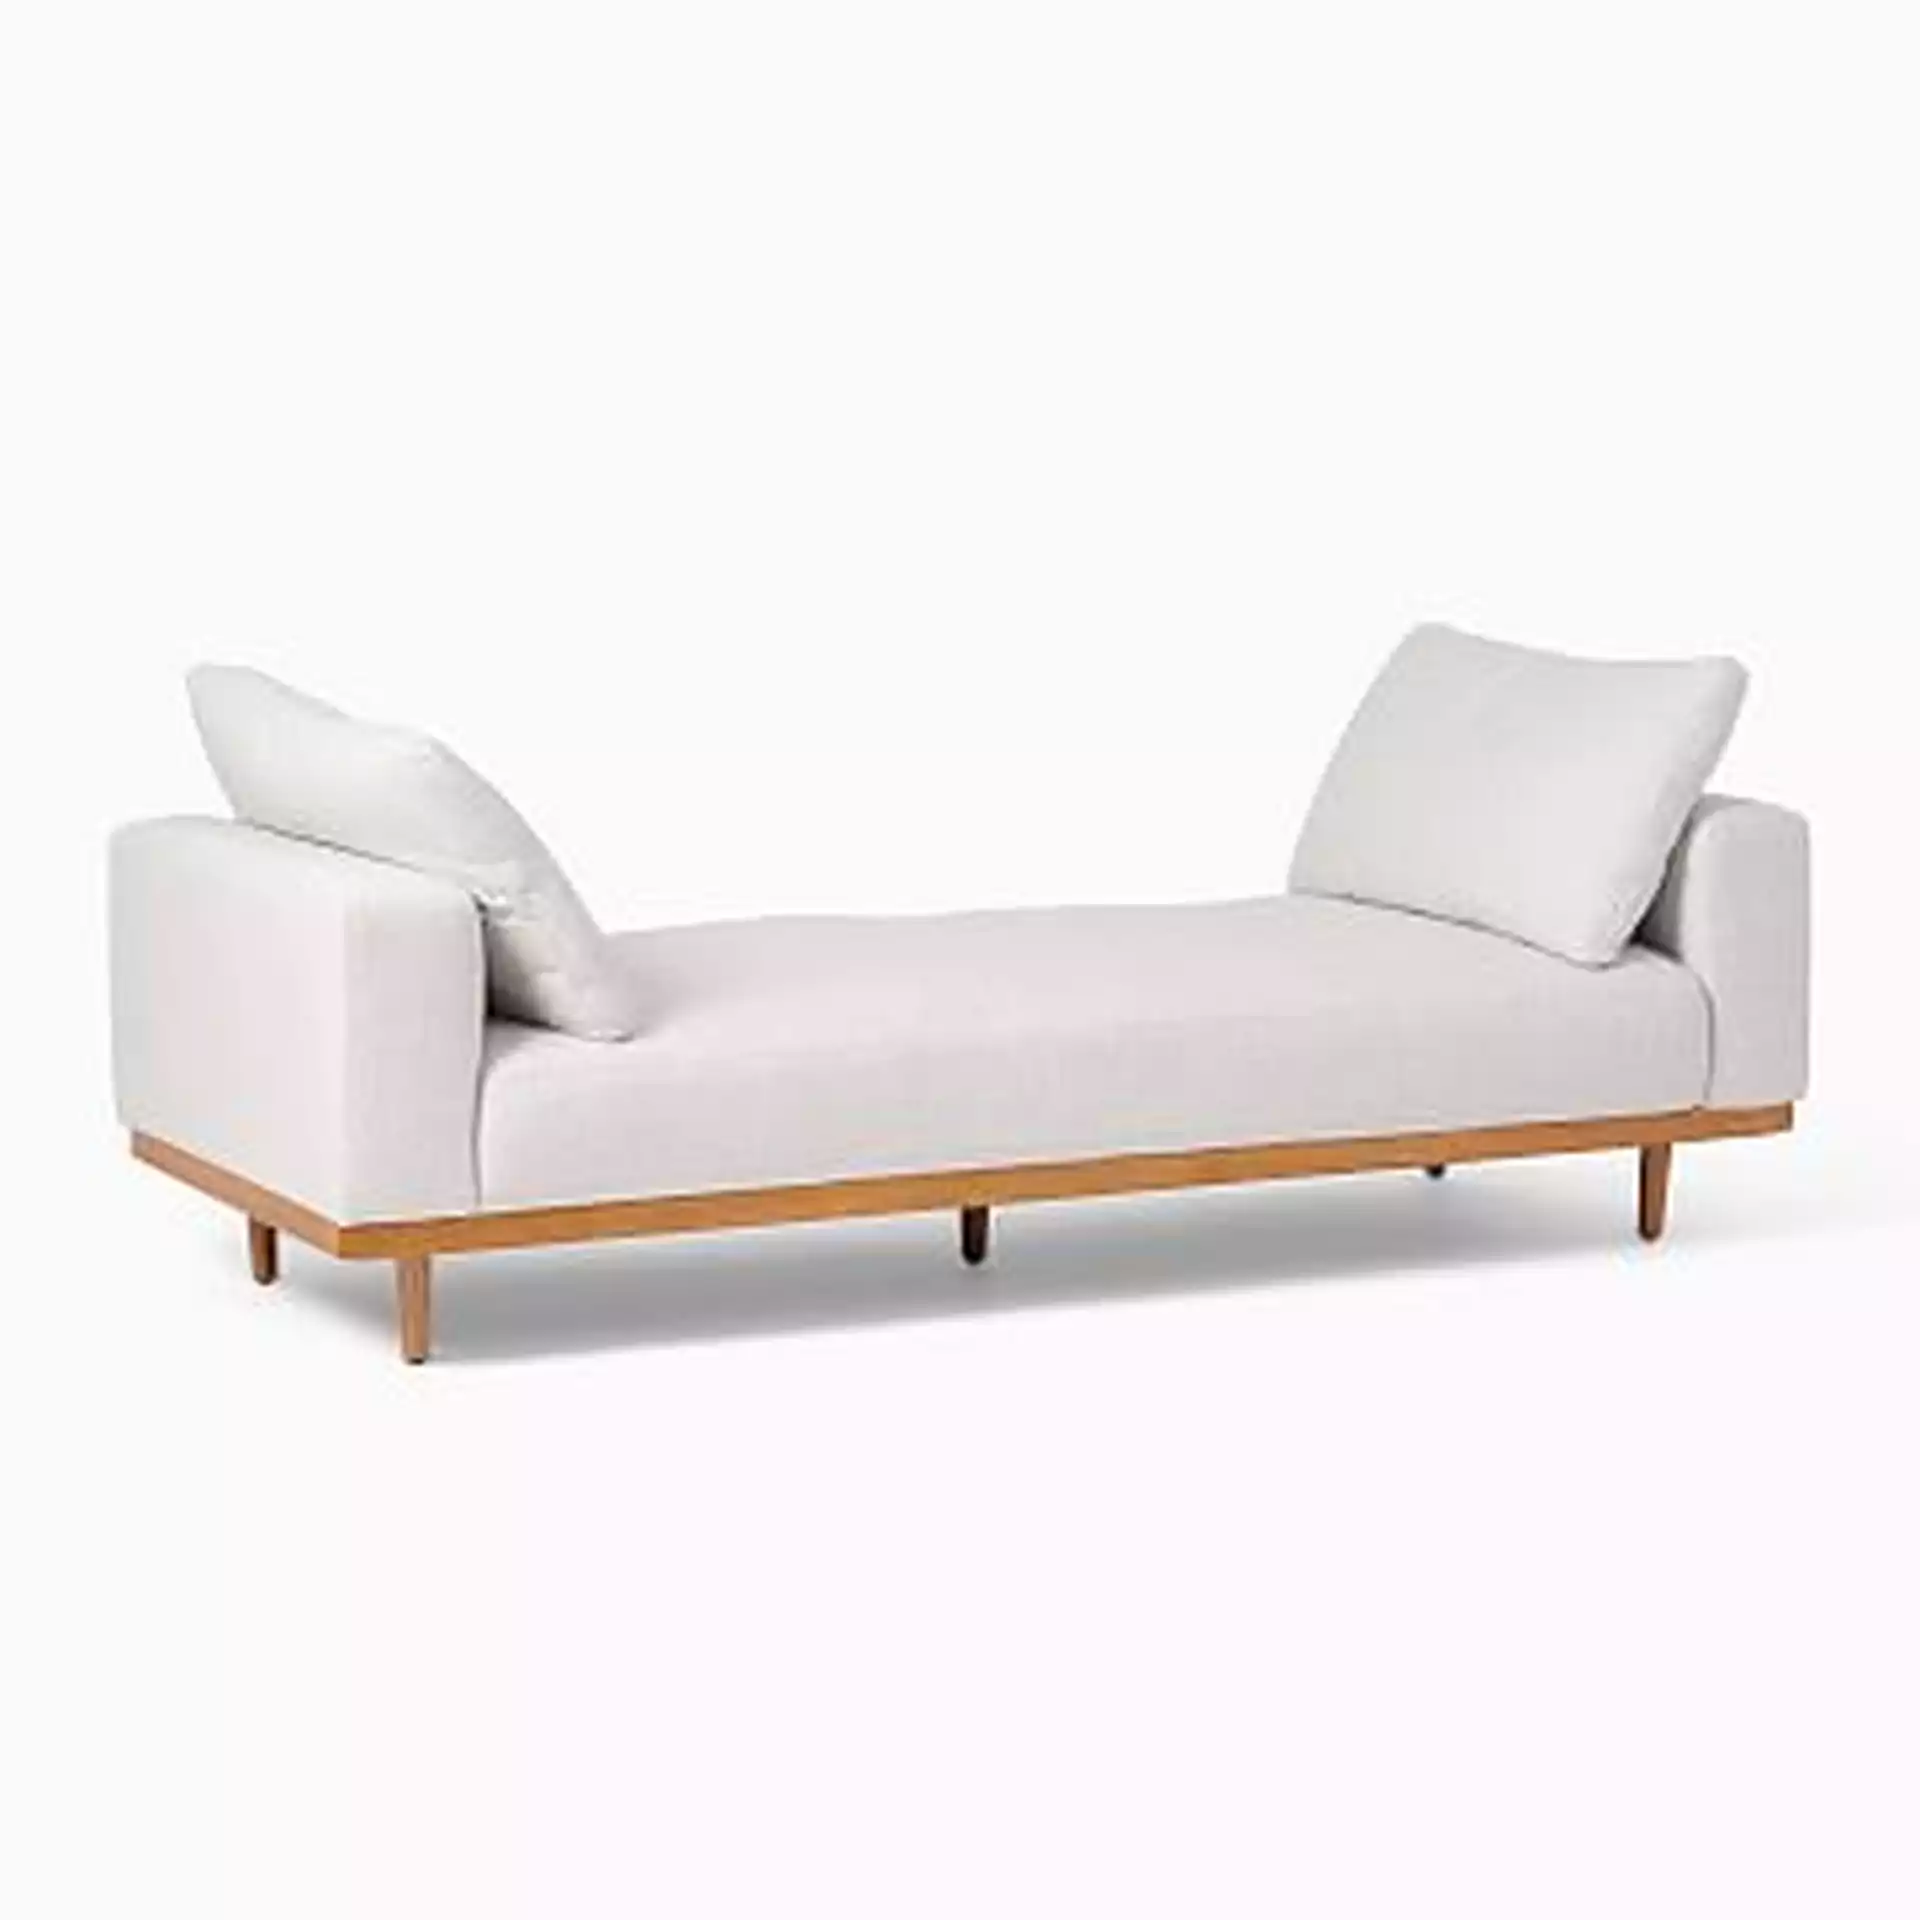 Newport Daybed, Down, Yarn Dyed Linen Weave, Alabaster, Pecan